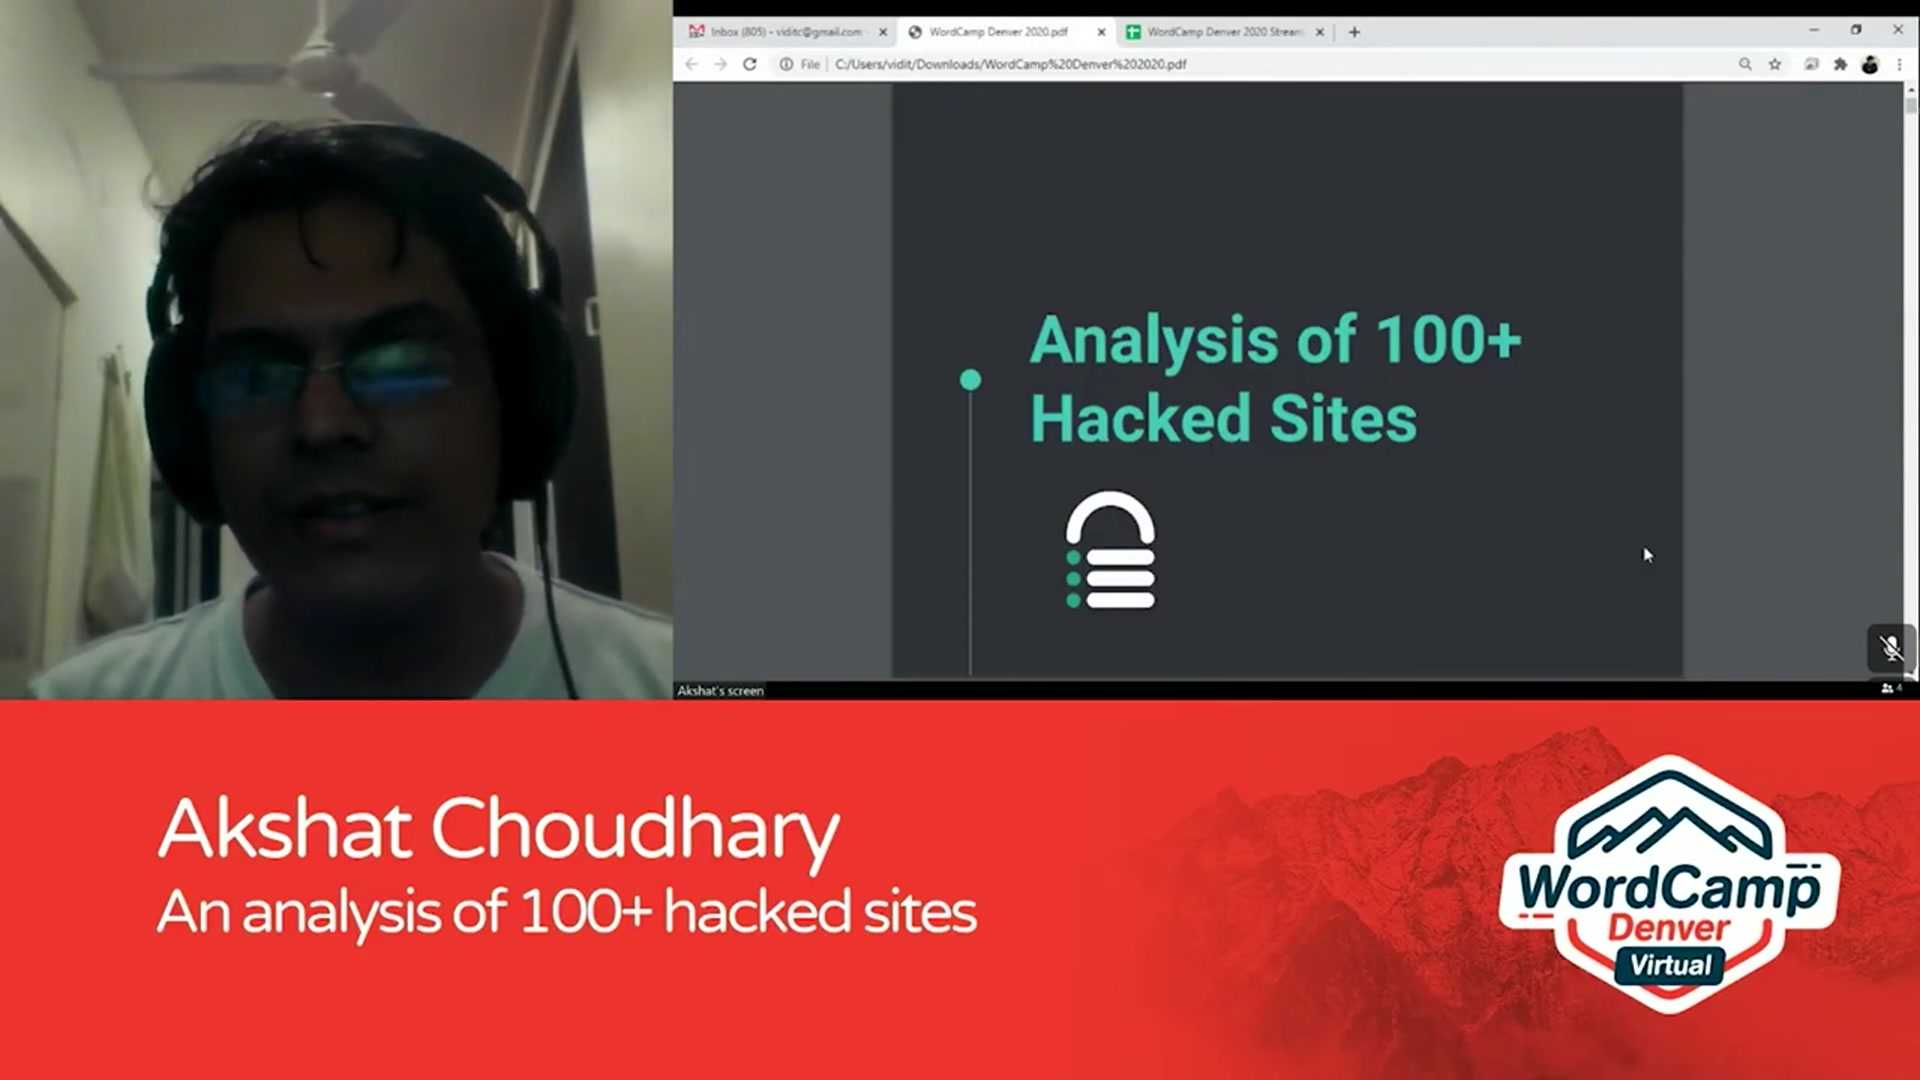 Akshat Choudhary: An Analysis of 100+ Hacked Sites